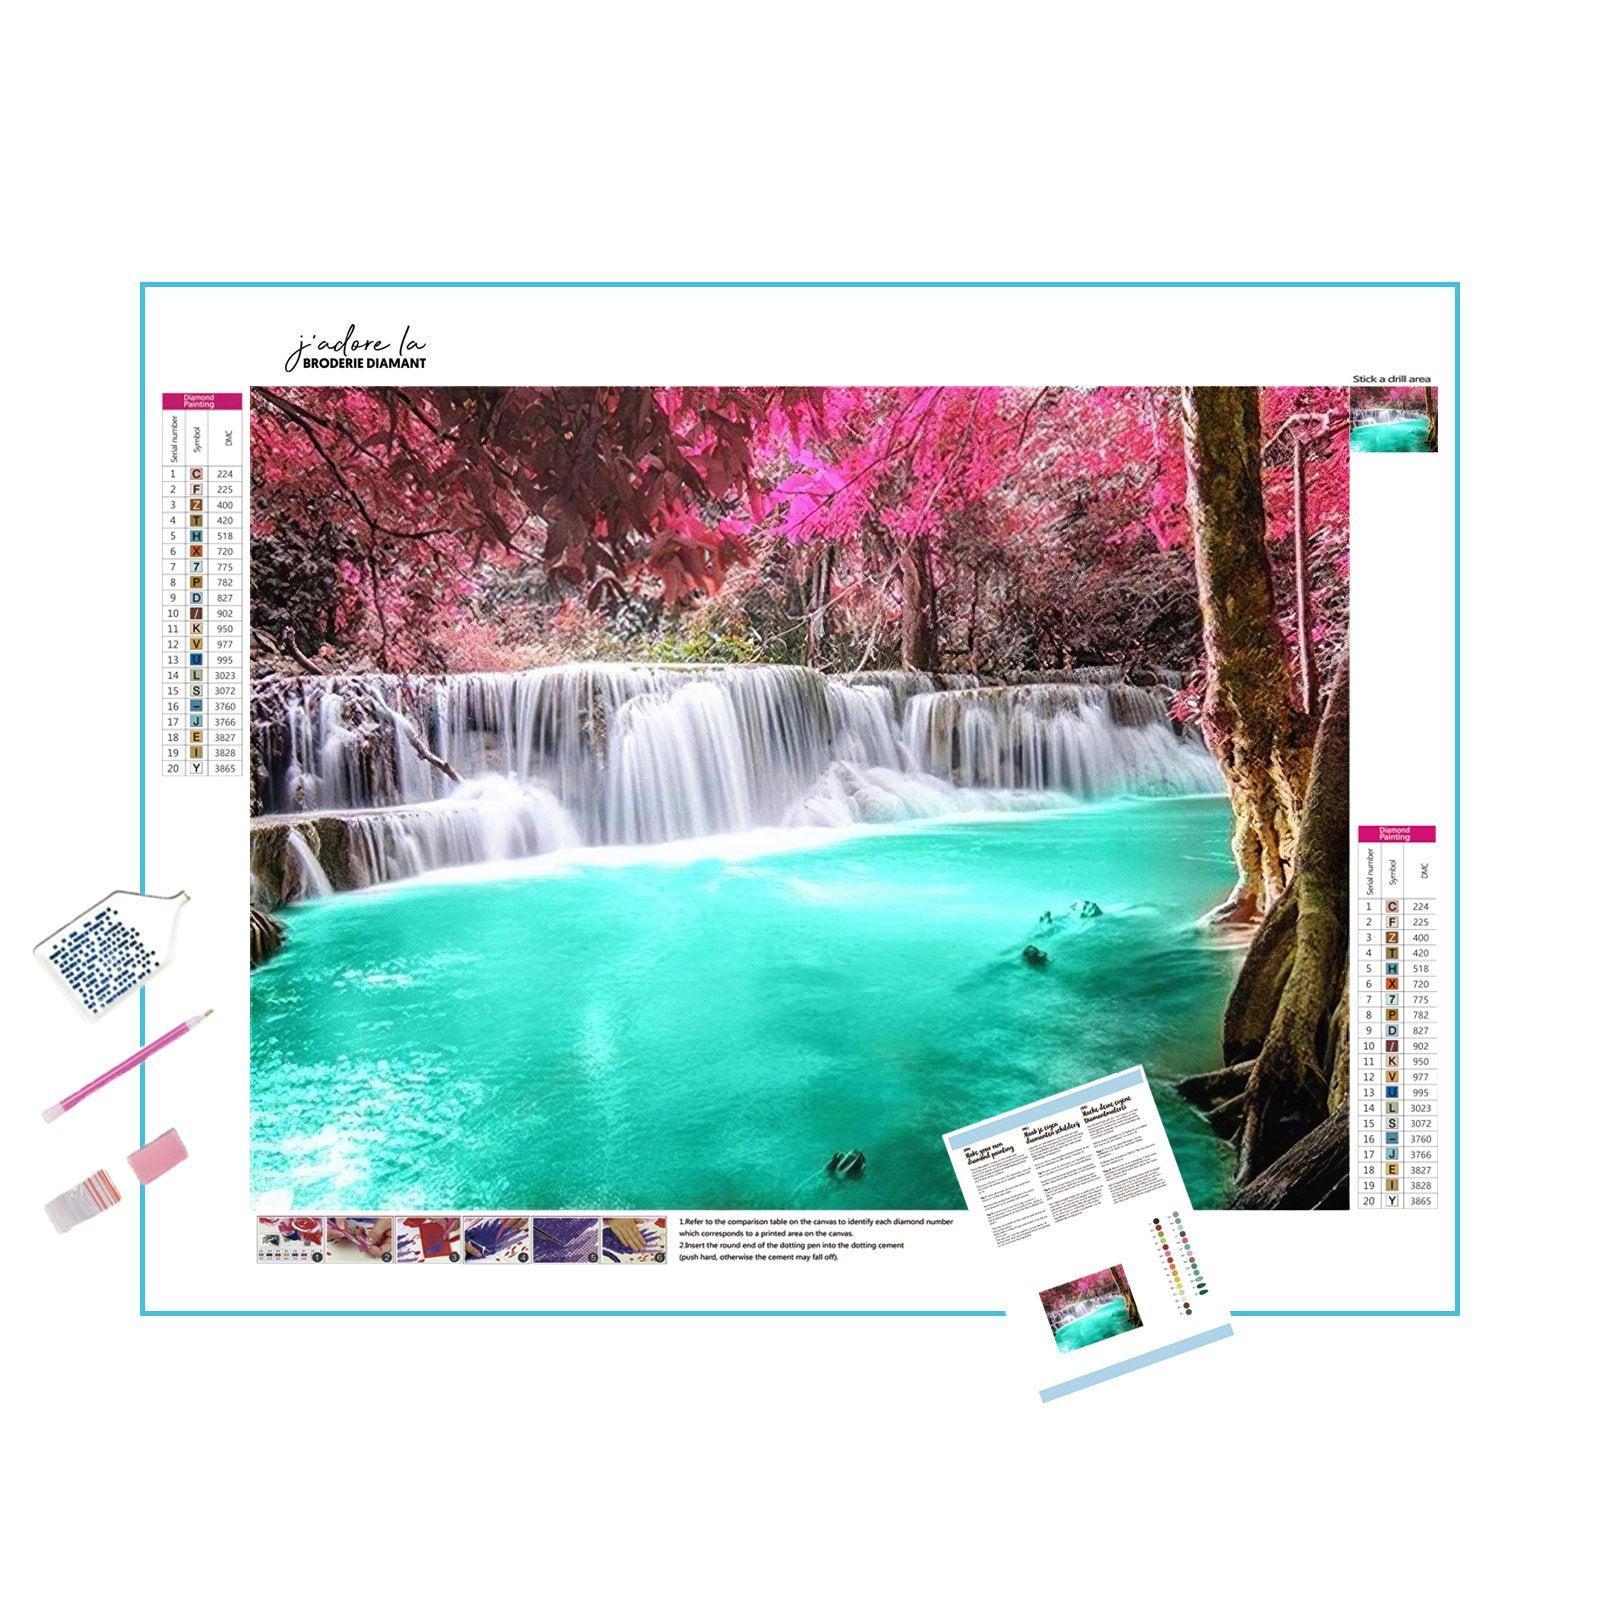 Escape to a cascade beneath blooming rose trees.Fresh Waterfall Under Rose Trees - Diamondartlove